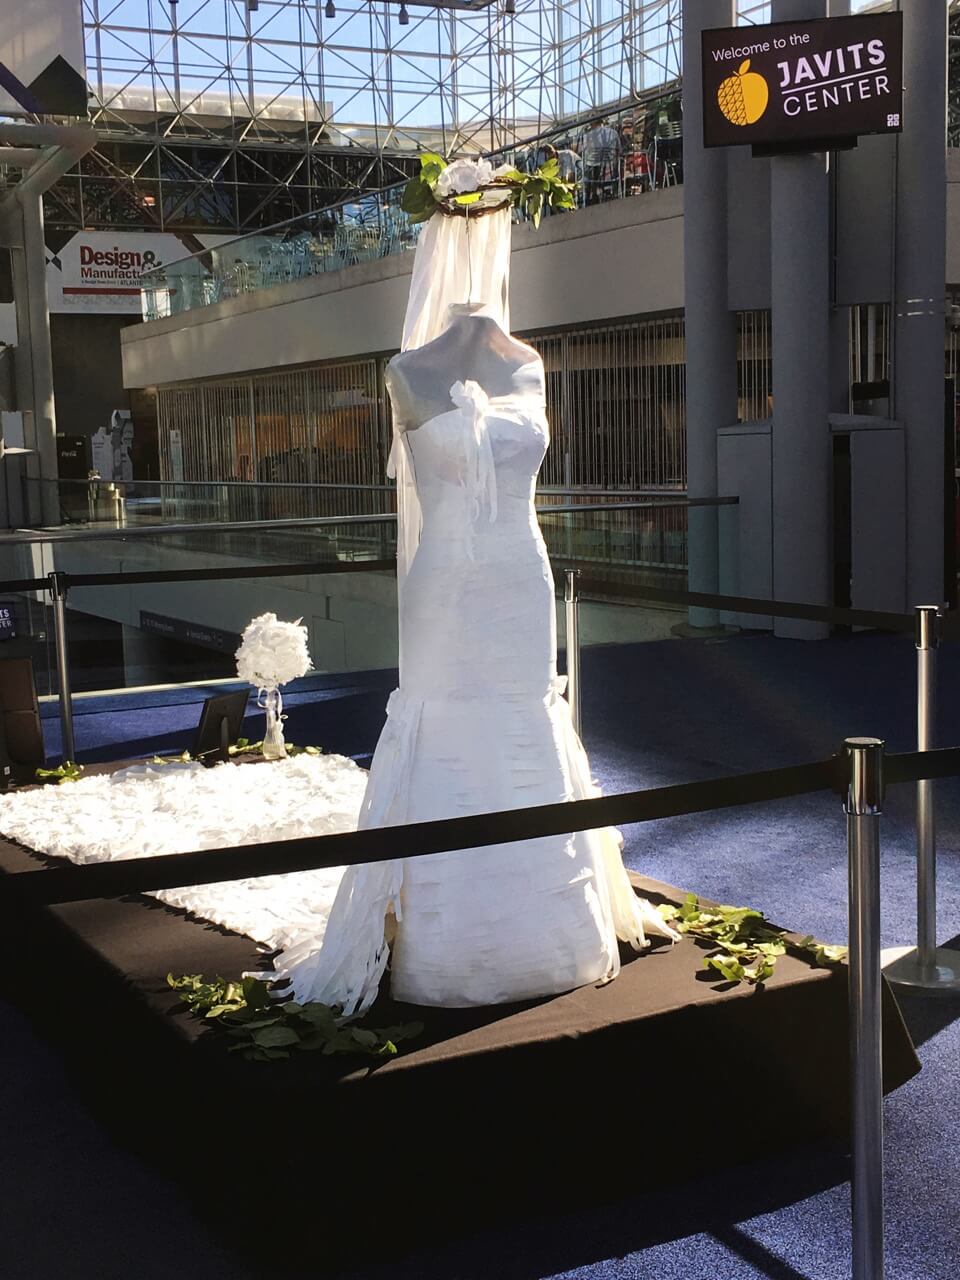 Bella’s completed gown was unveiled by Beacon Converters and DuPont Protection Solutions, <br> at the Medical Design & Manufacturing (MD&M) East Expo and Conference in New York City.